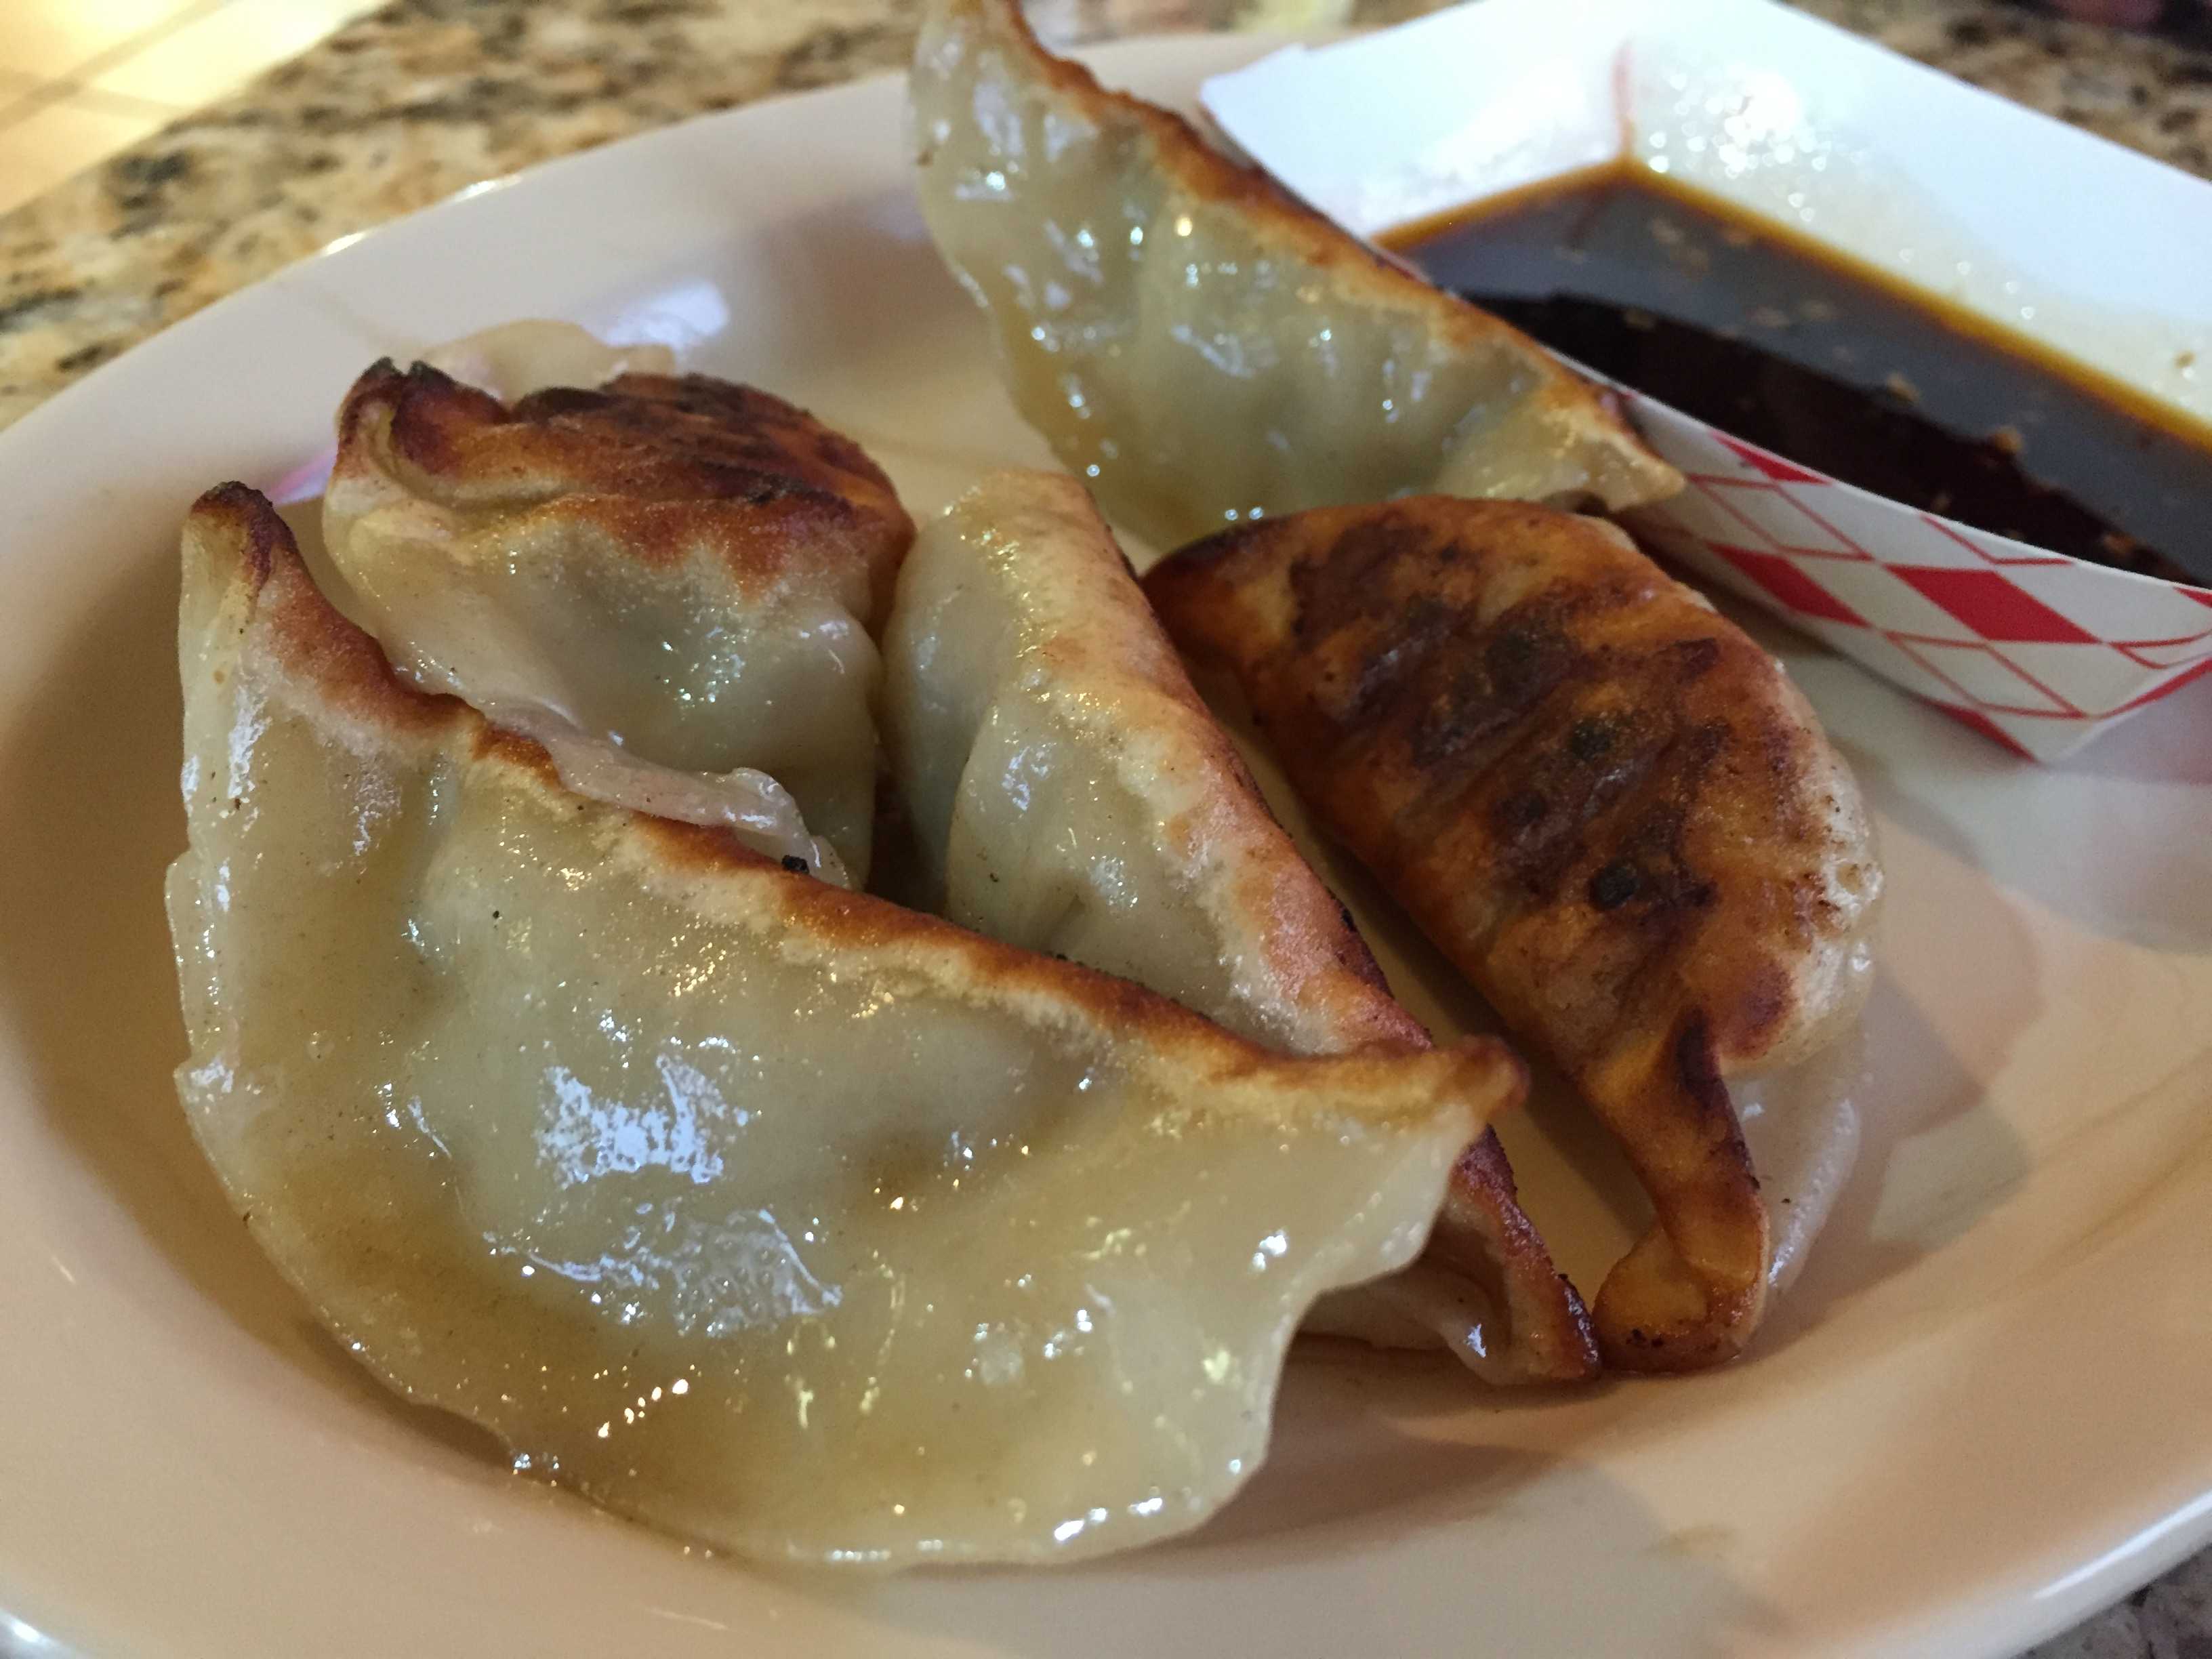 The potstickers’ slightly burnt bottom-sides glisten with oil. Their price is $3.50. Photos by Caitlyn Tjong.